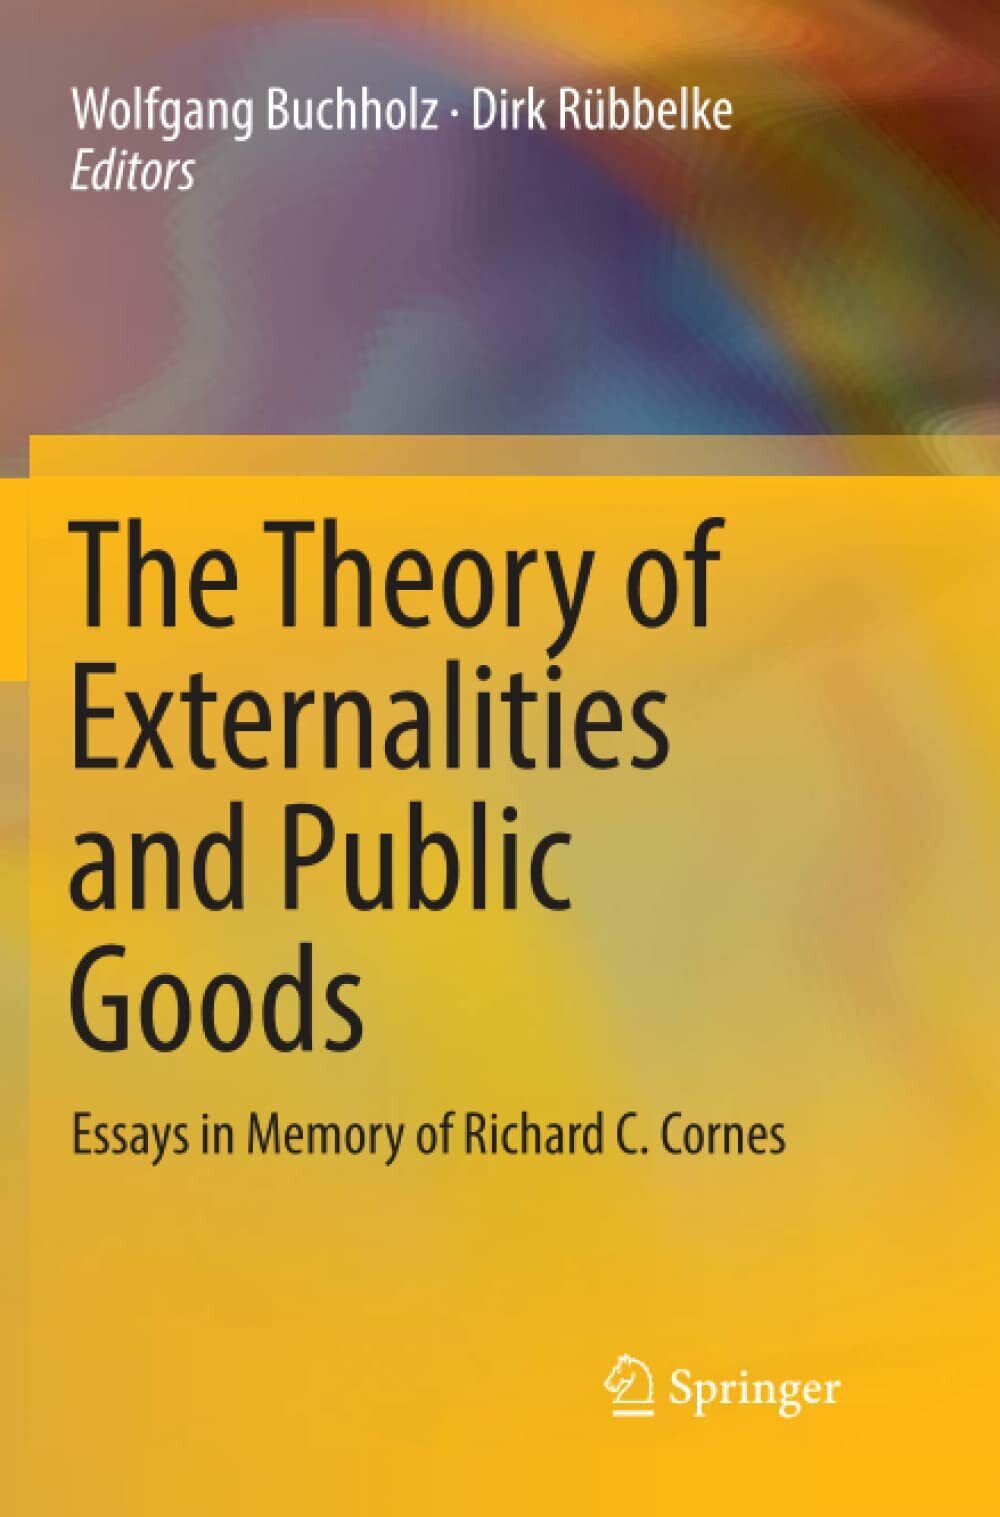 The Theory of Externalities and Public Goods - Wolfgang Buchholz  - 2018 libro usato